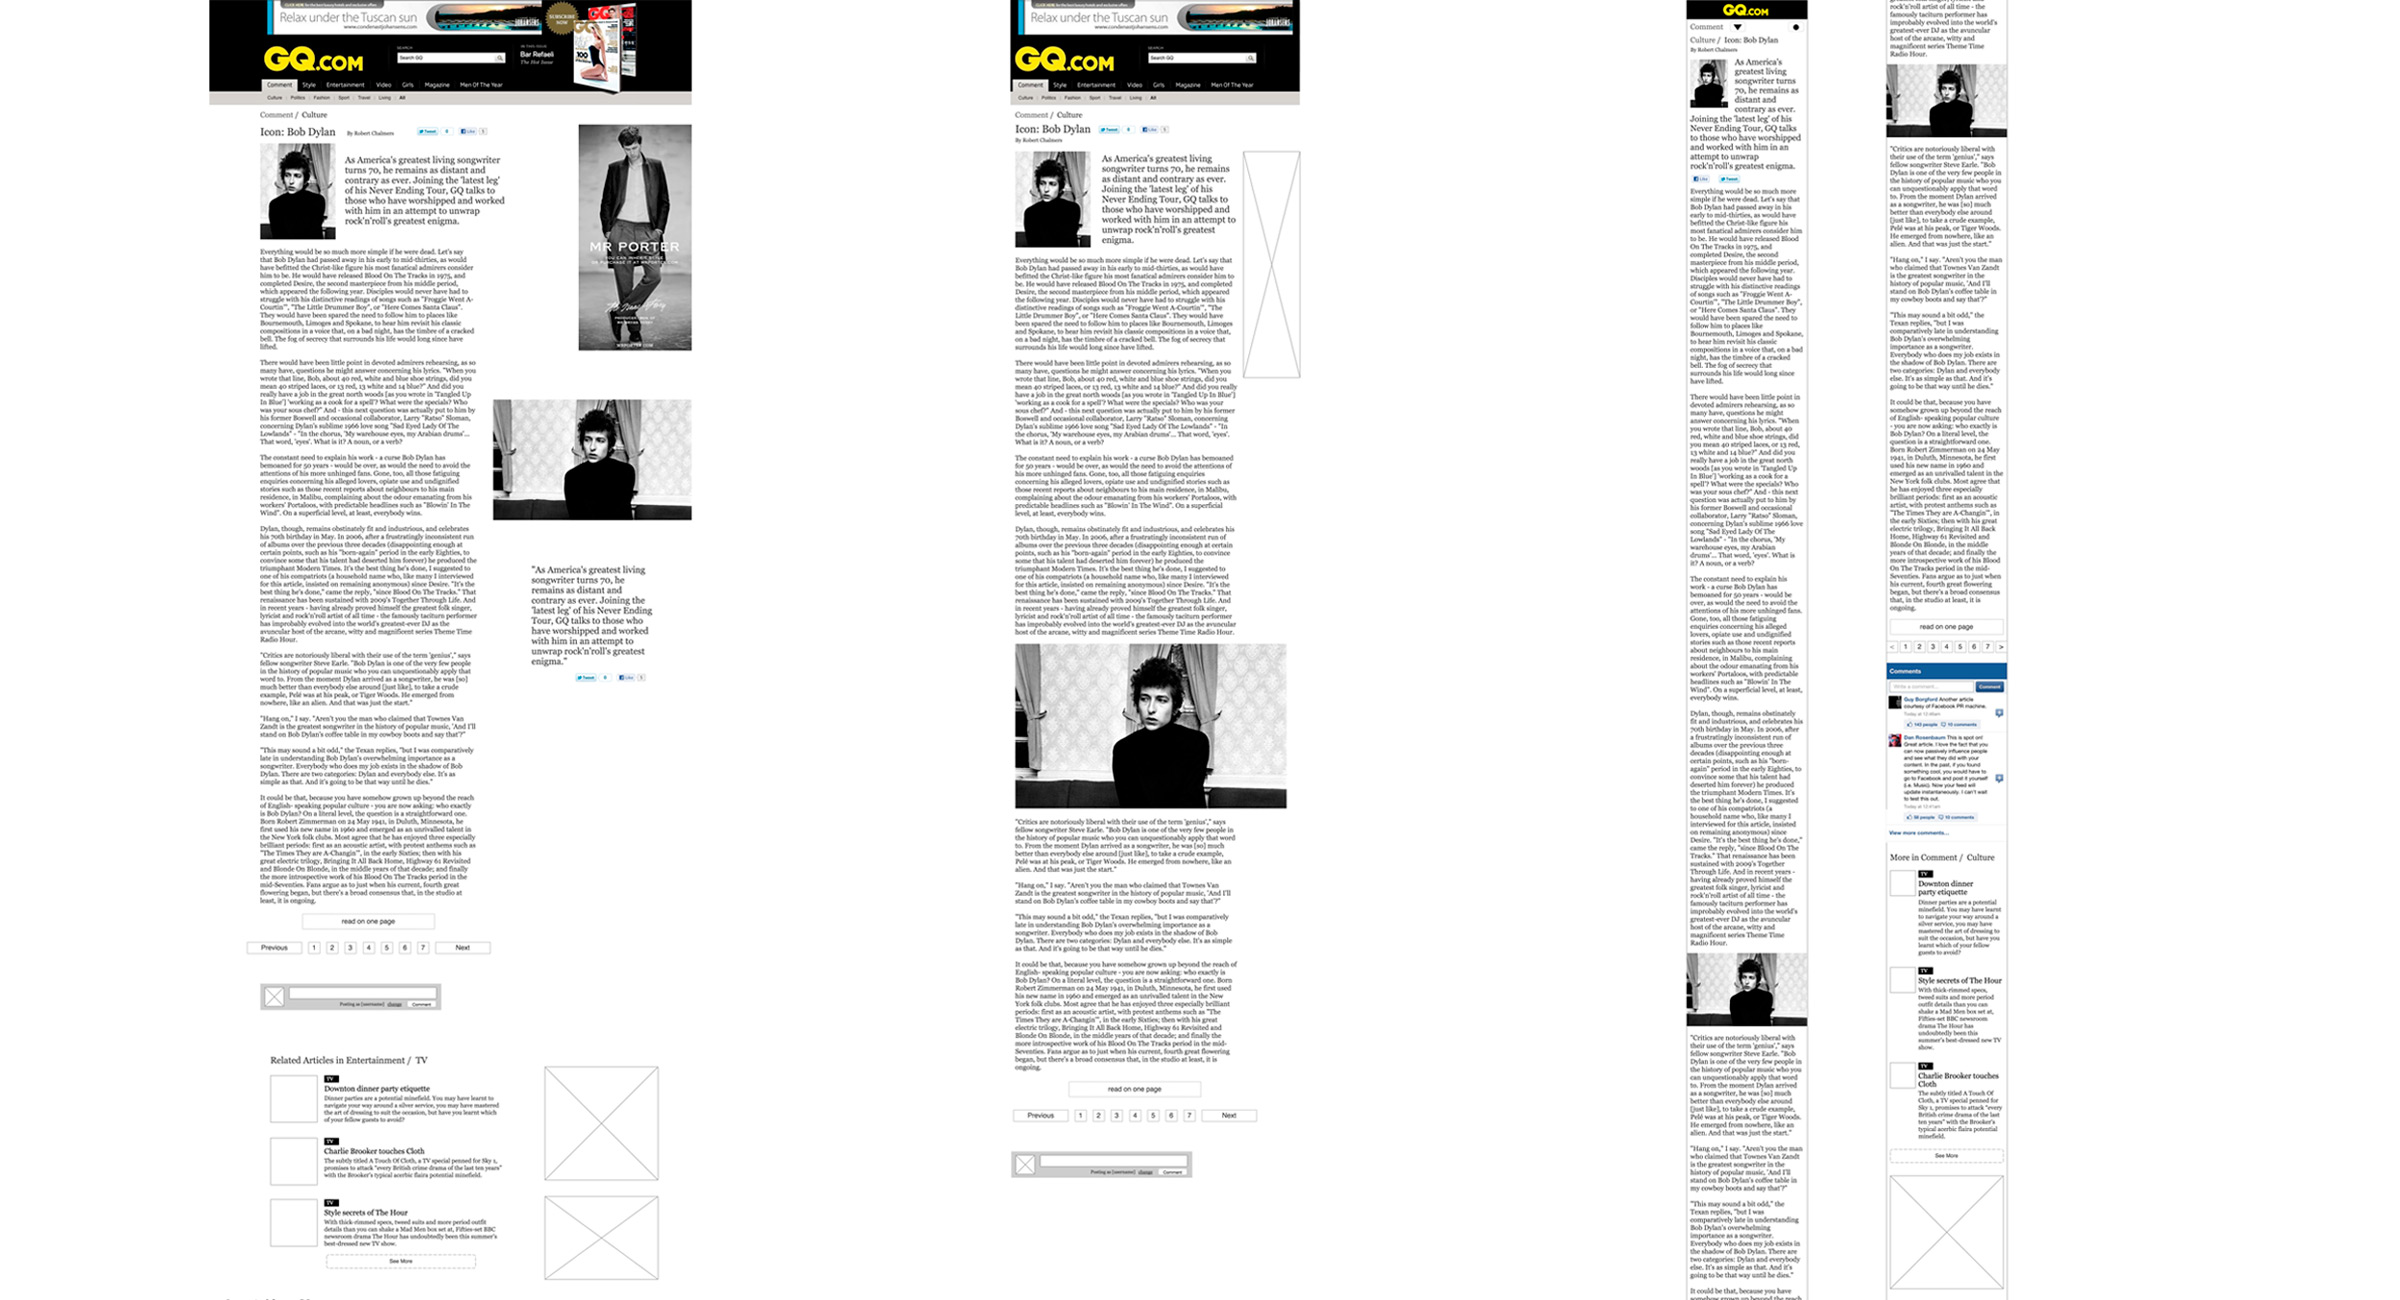 Wireframes looking at the responsive of a long form article and when media items are sticky